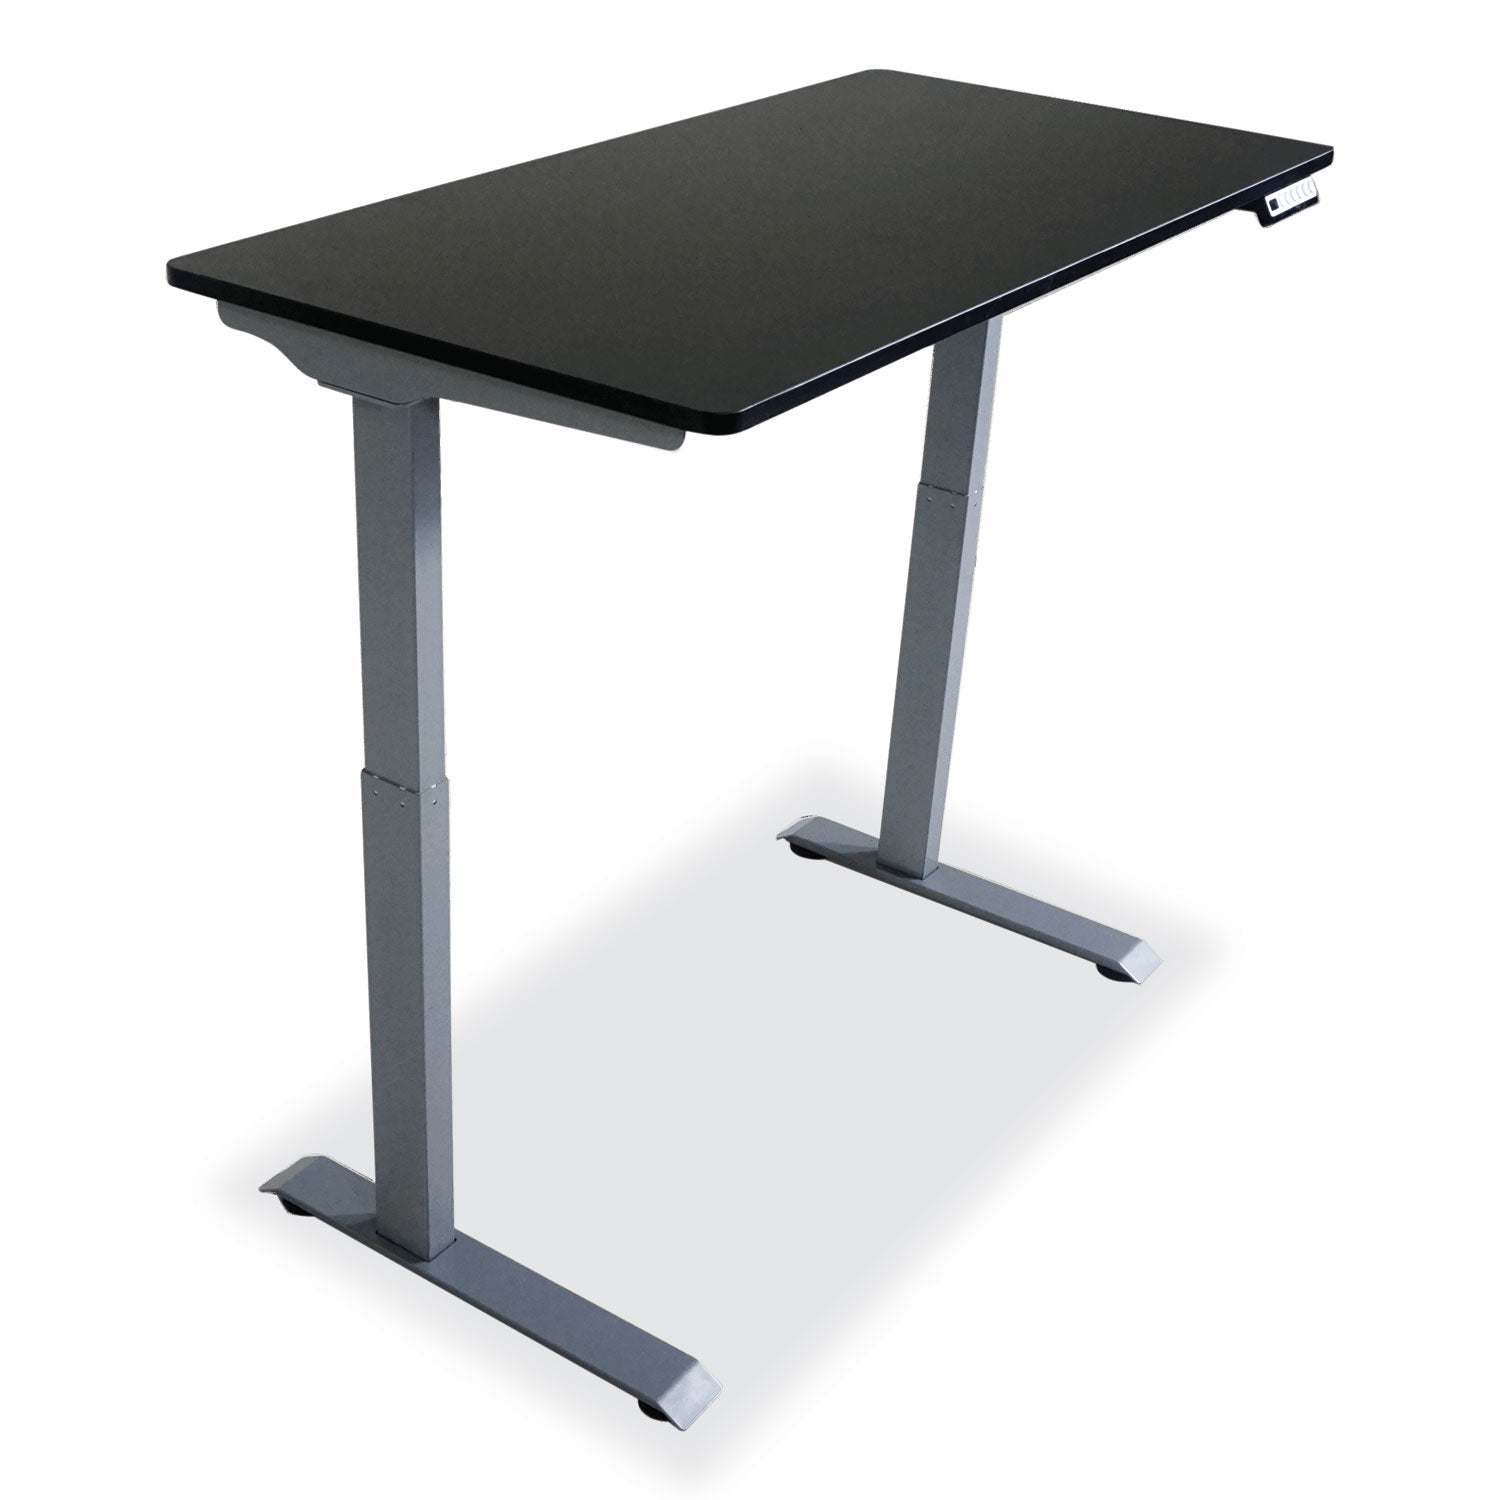 electric-height-adjustable-standing-desk-48-x-236-x-287-to-484-black-ships-in-1-3-business-days_vctdc840b - 1